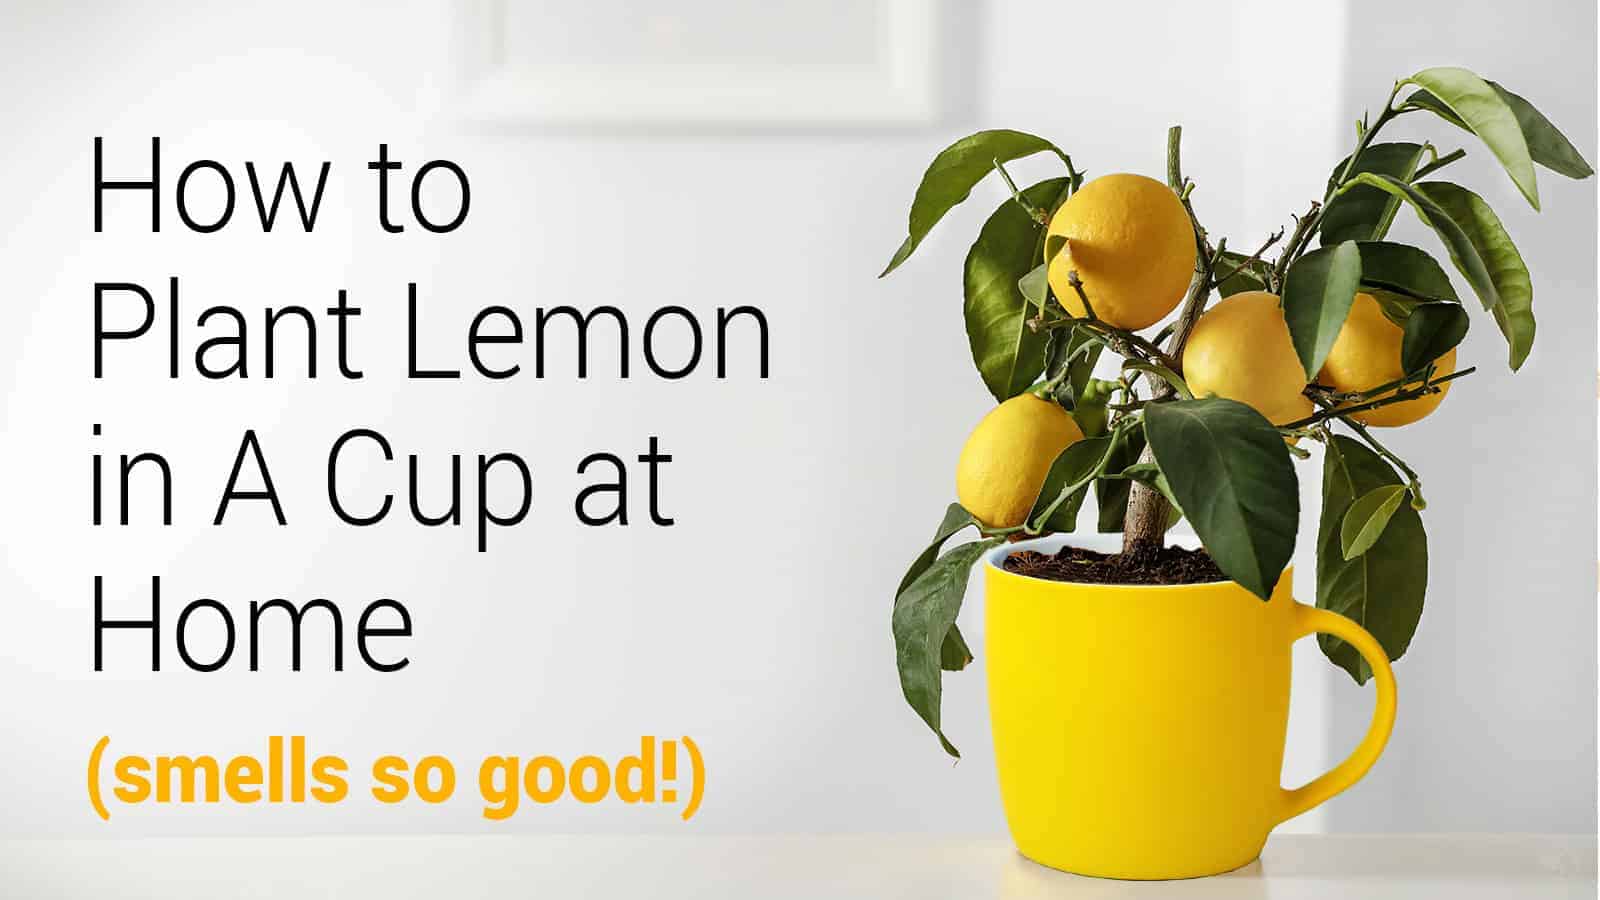 How to Plant Lemon in A Cup at Home (Smells So Good!)